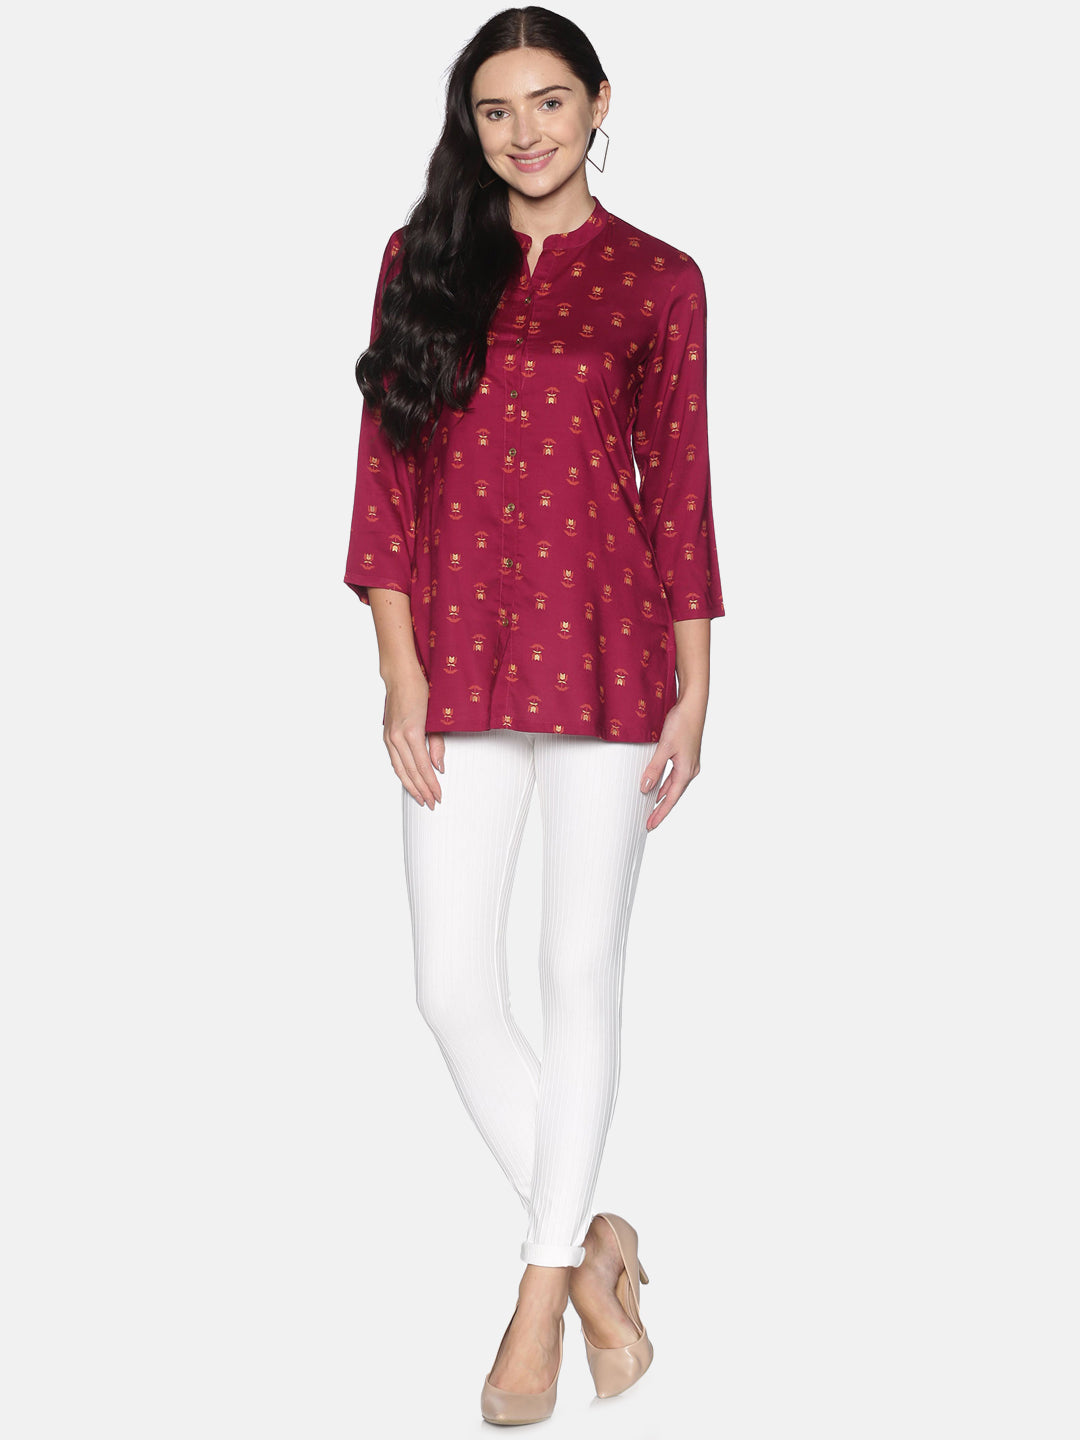 Burgundy Gold Printed Tunic With Mandarin Collar And Gold Metal Buttons